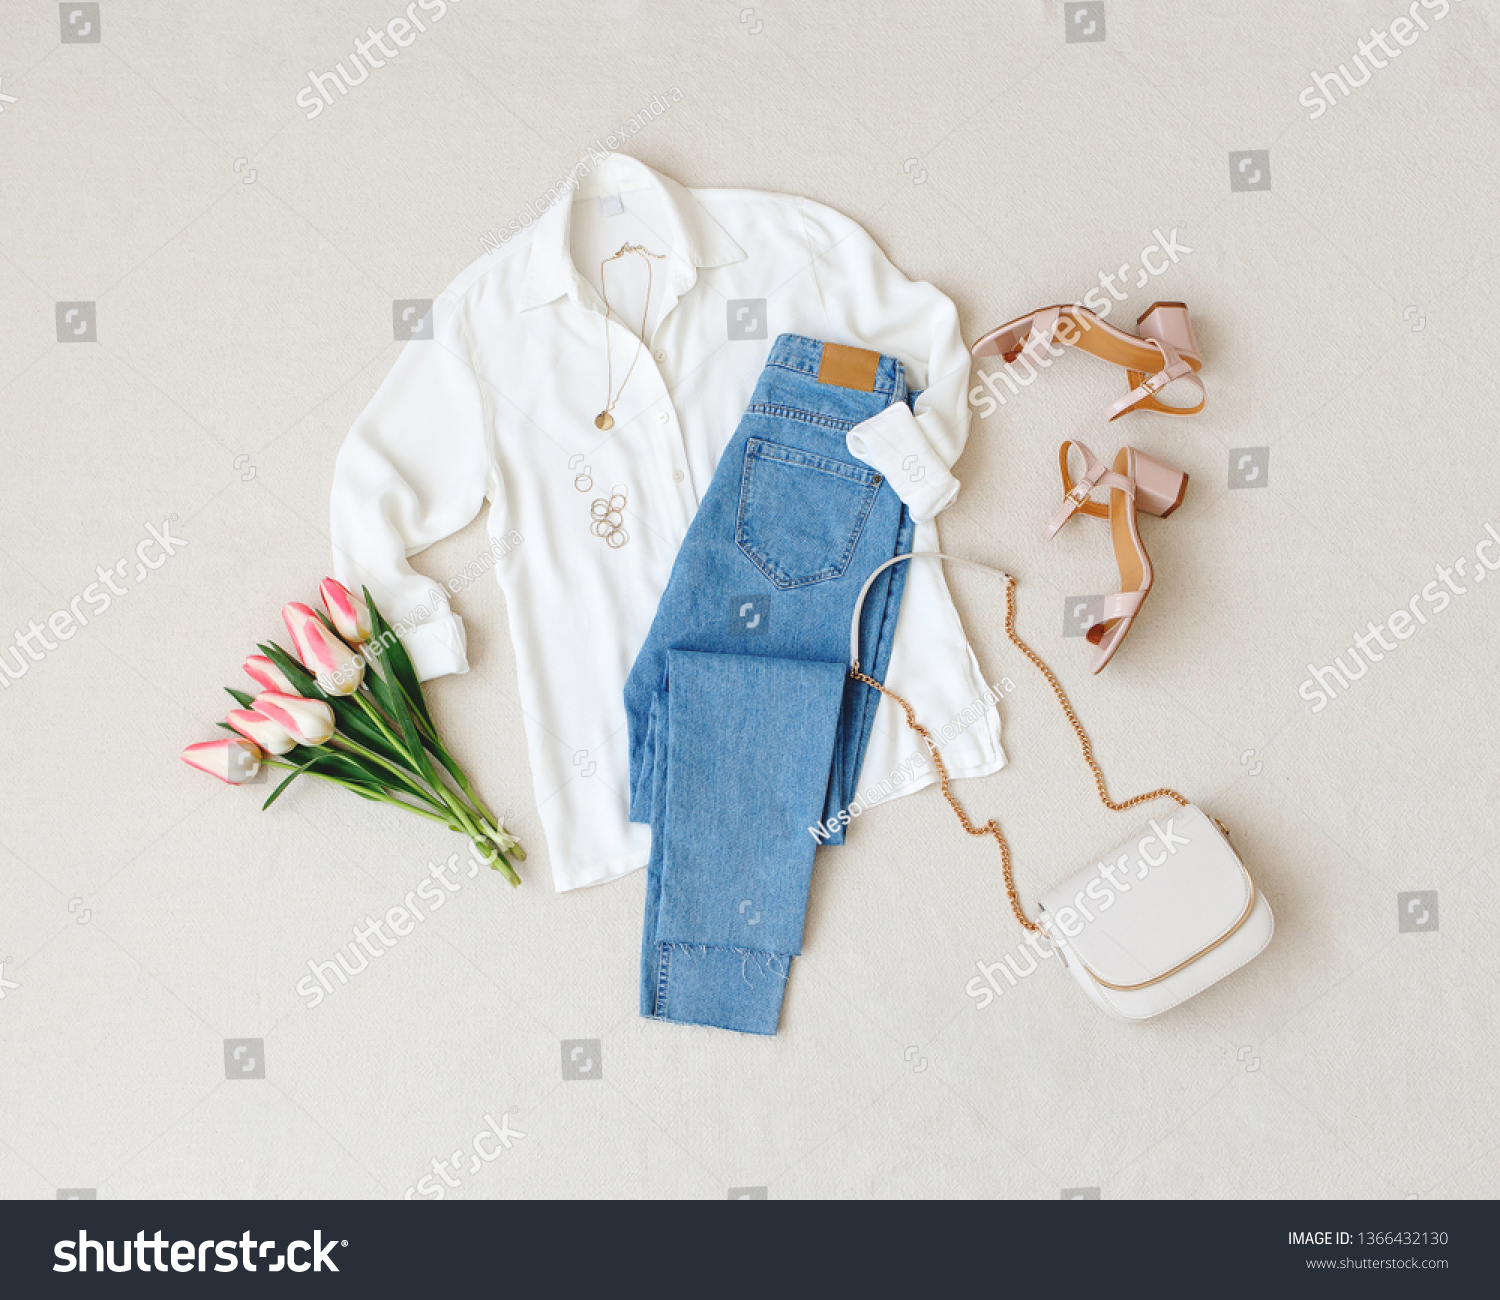 Blue jeans, white shirt, heeled sandals, bag with chain strap, jewelry, bouquet of pink tulips flowers on beige background. Women's stylish spring summer outfit. Trendy clothes. Flat lay, top view. #1366432130